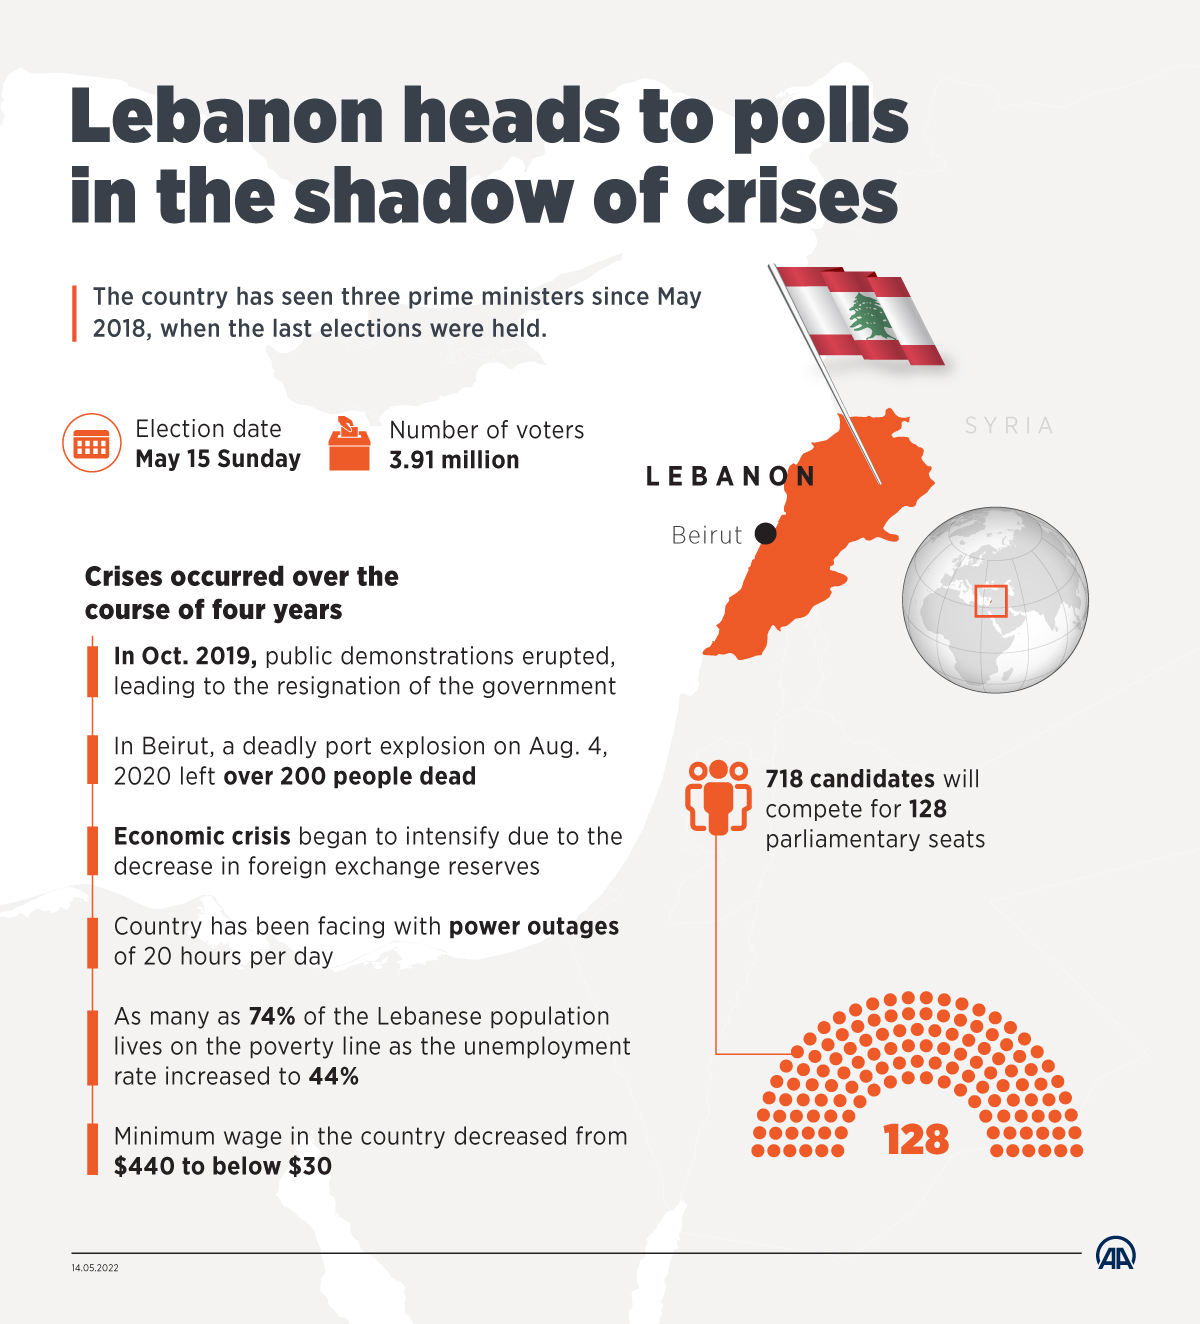 Lebanon heads to polls in the shadow of crises